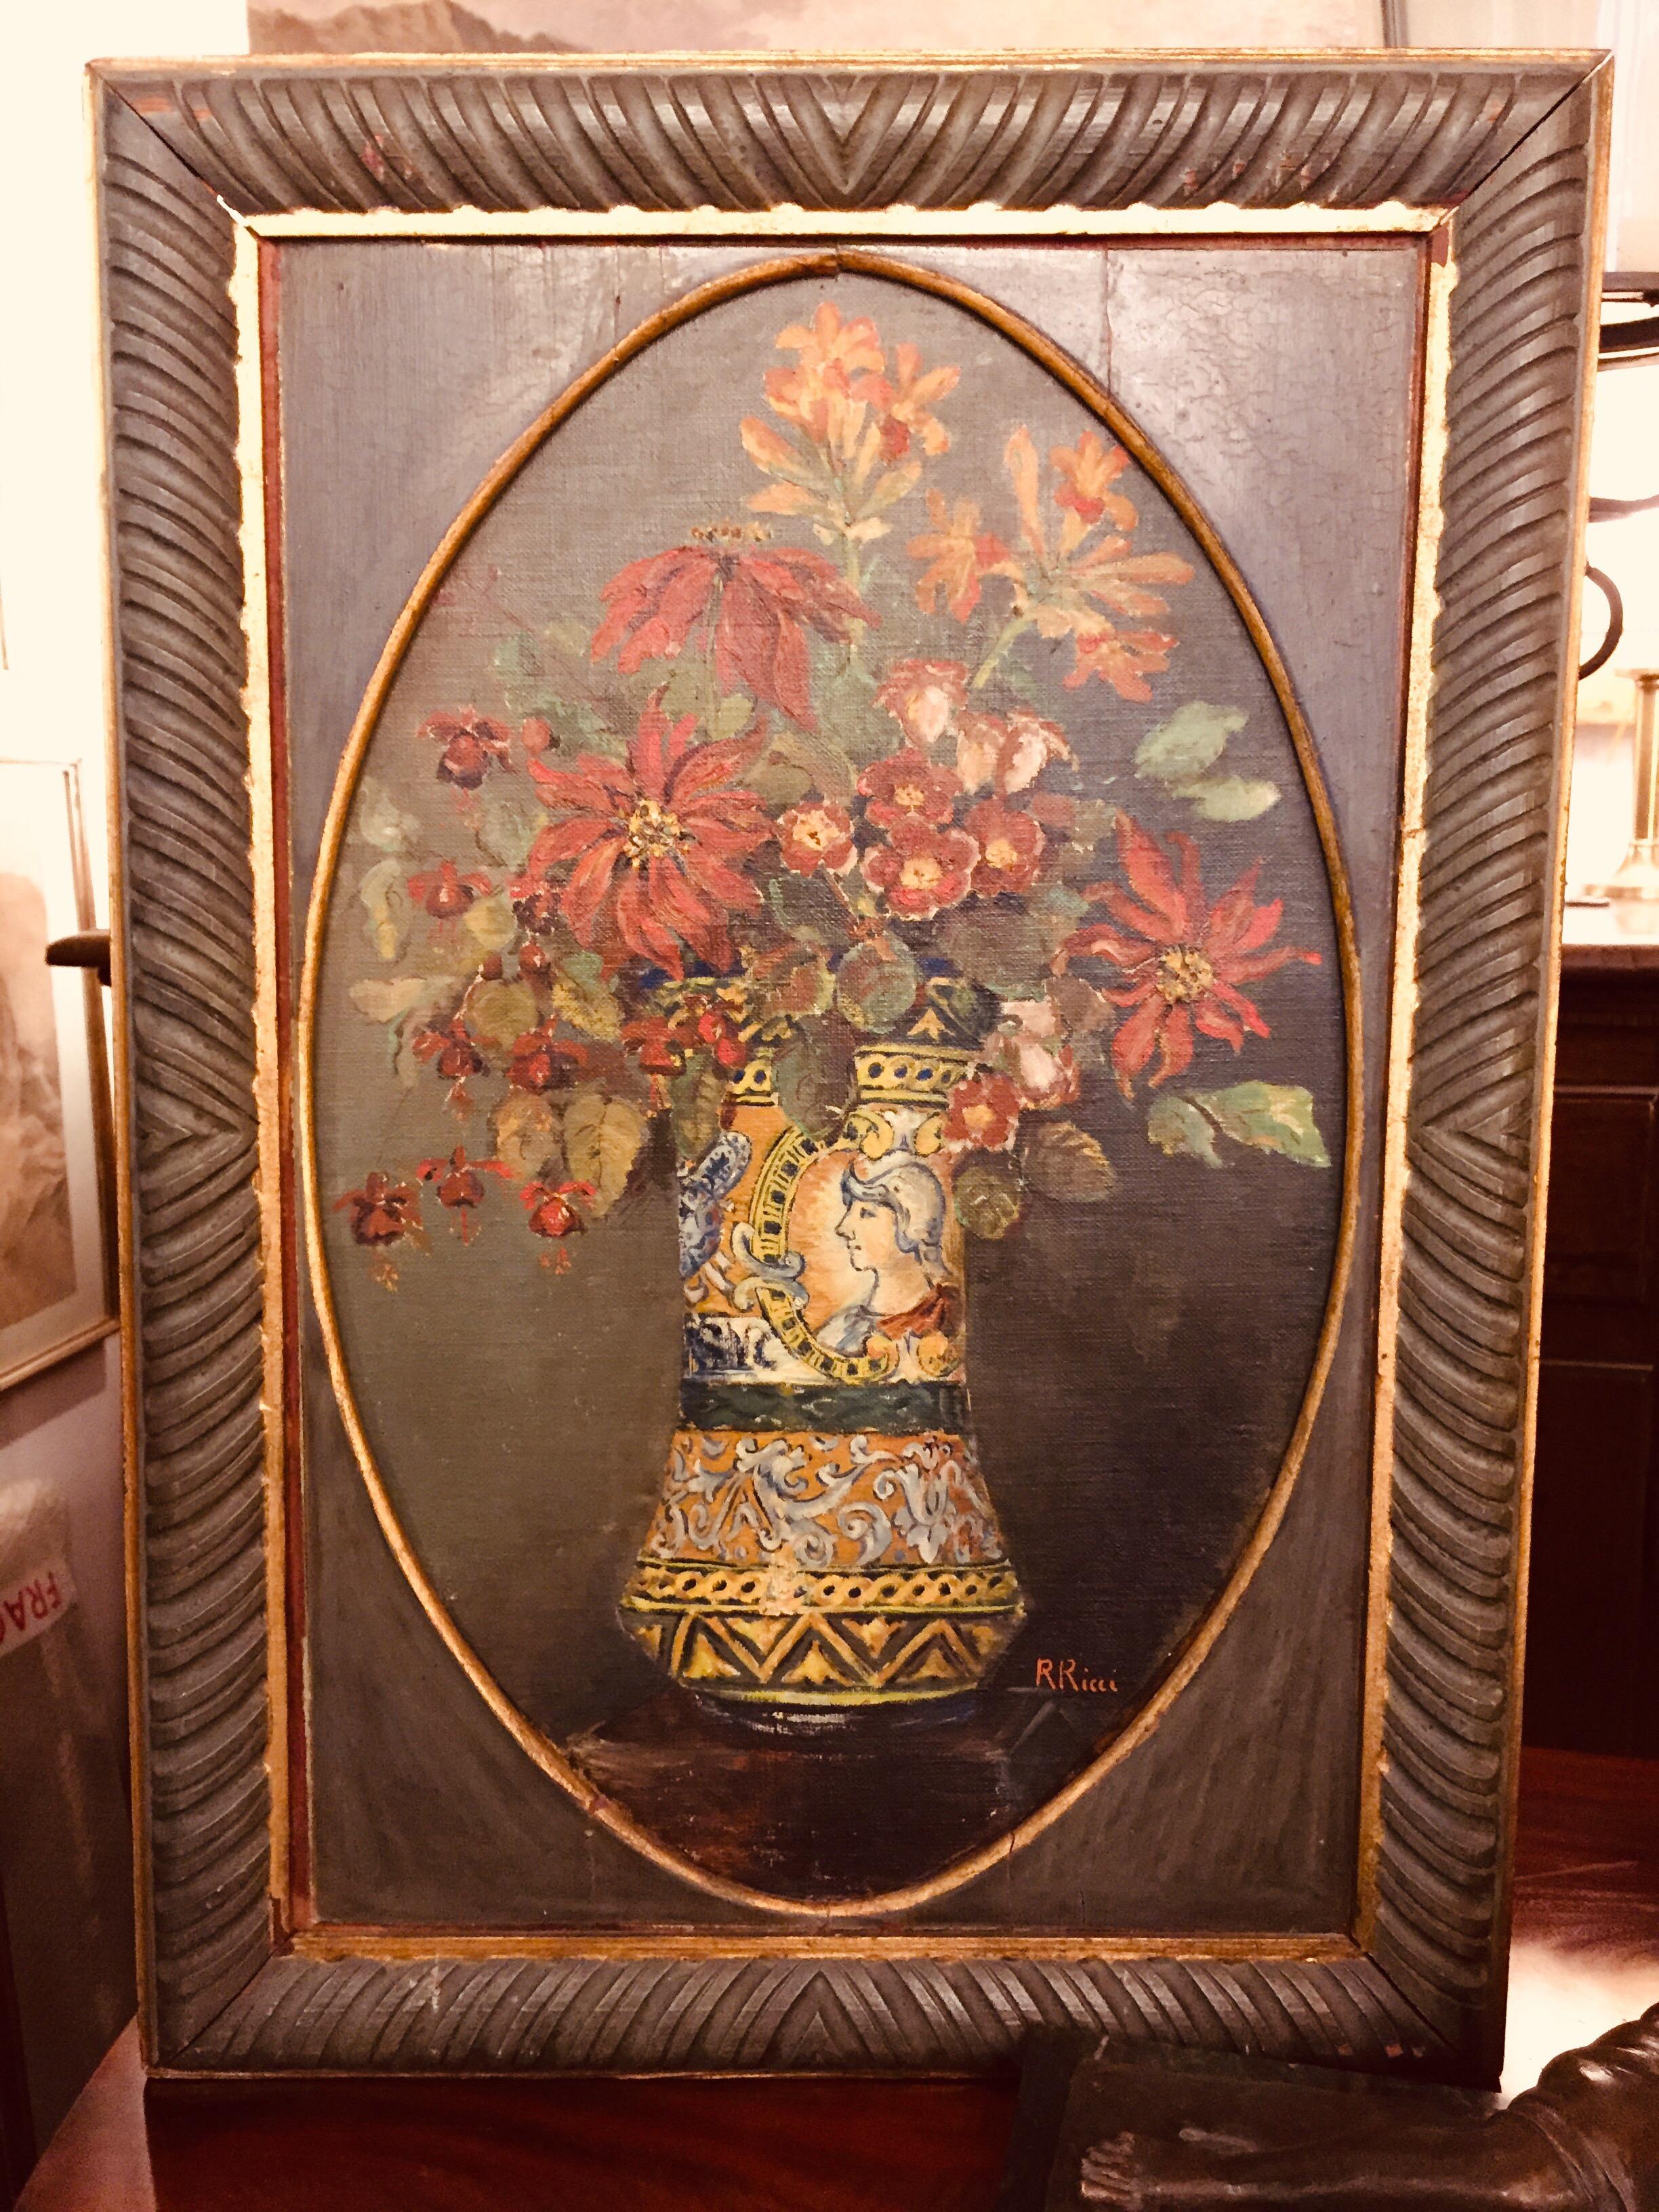 Pair of Italian Flower Still life Paintings by Ricci 20th Century Green Frames For Sale 8